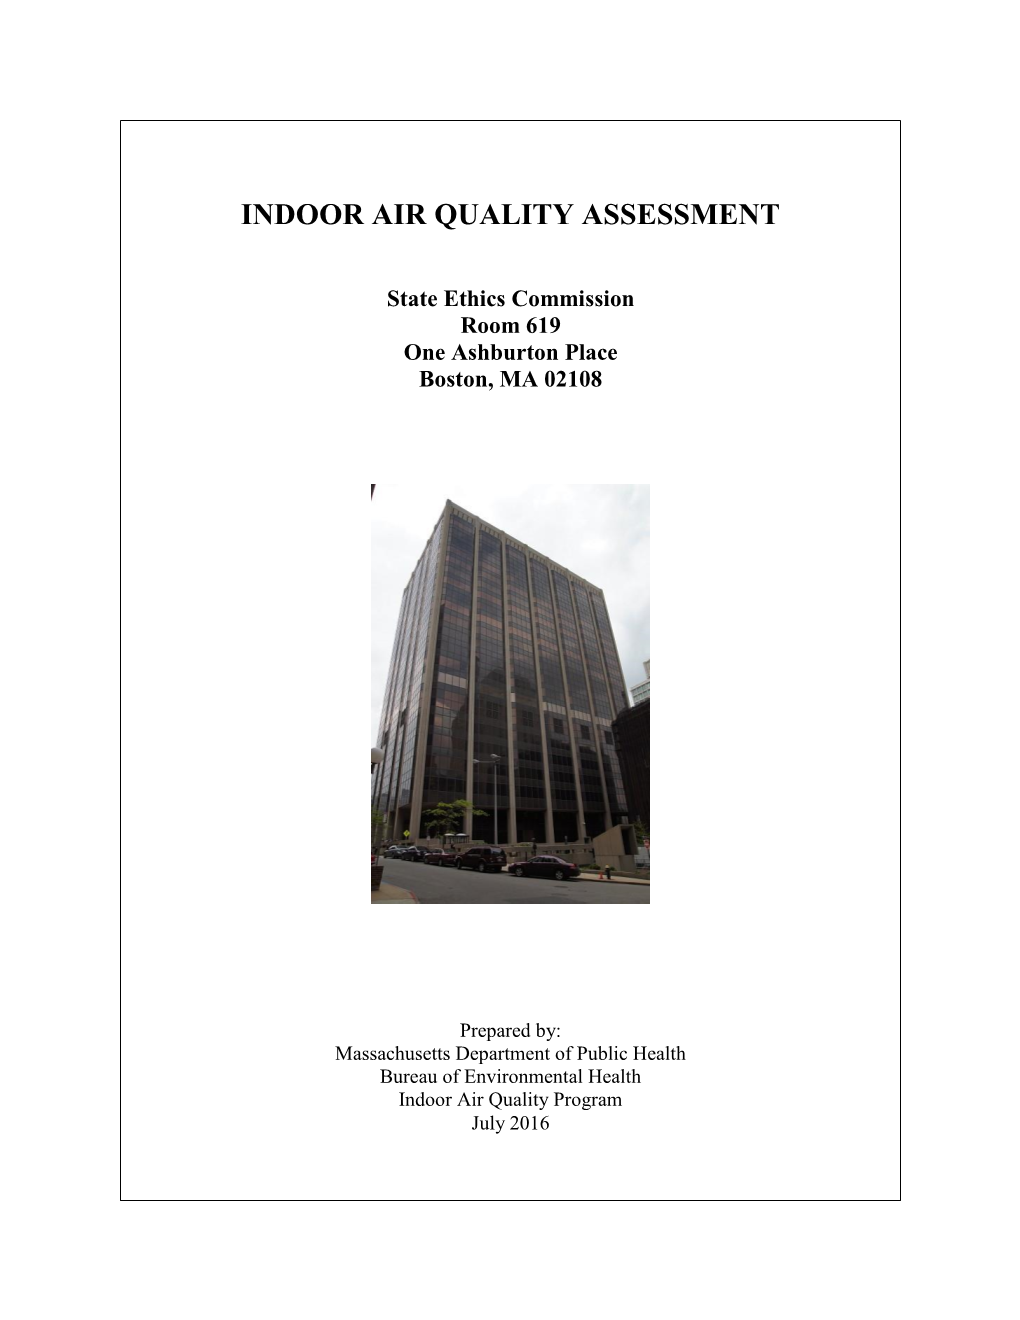 Indoor Air Quality Assessment-Boston State Ethics Commission Office